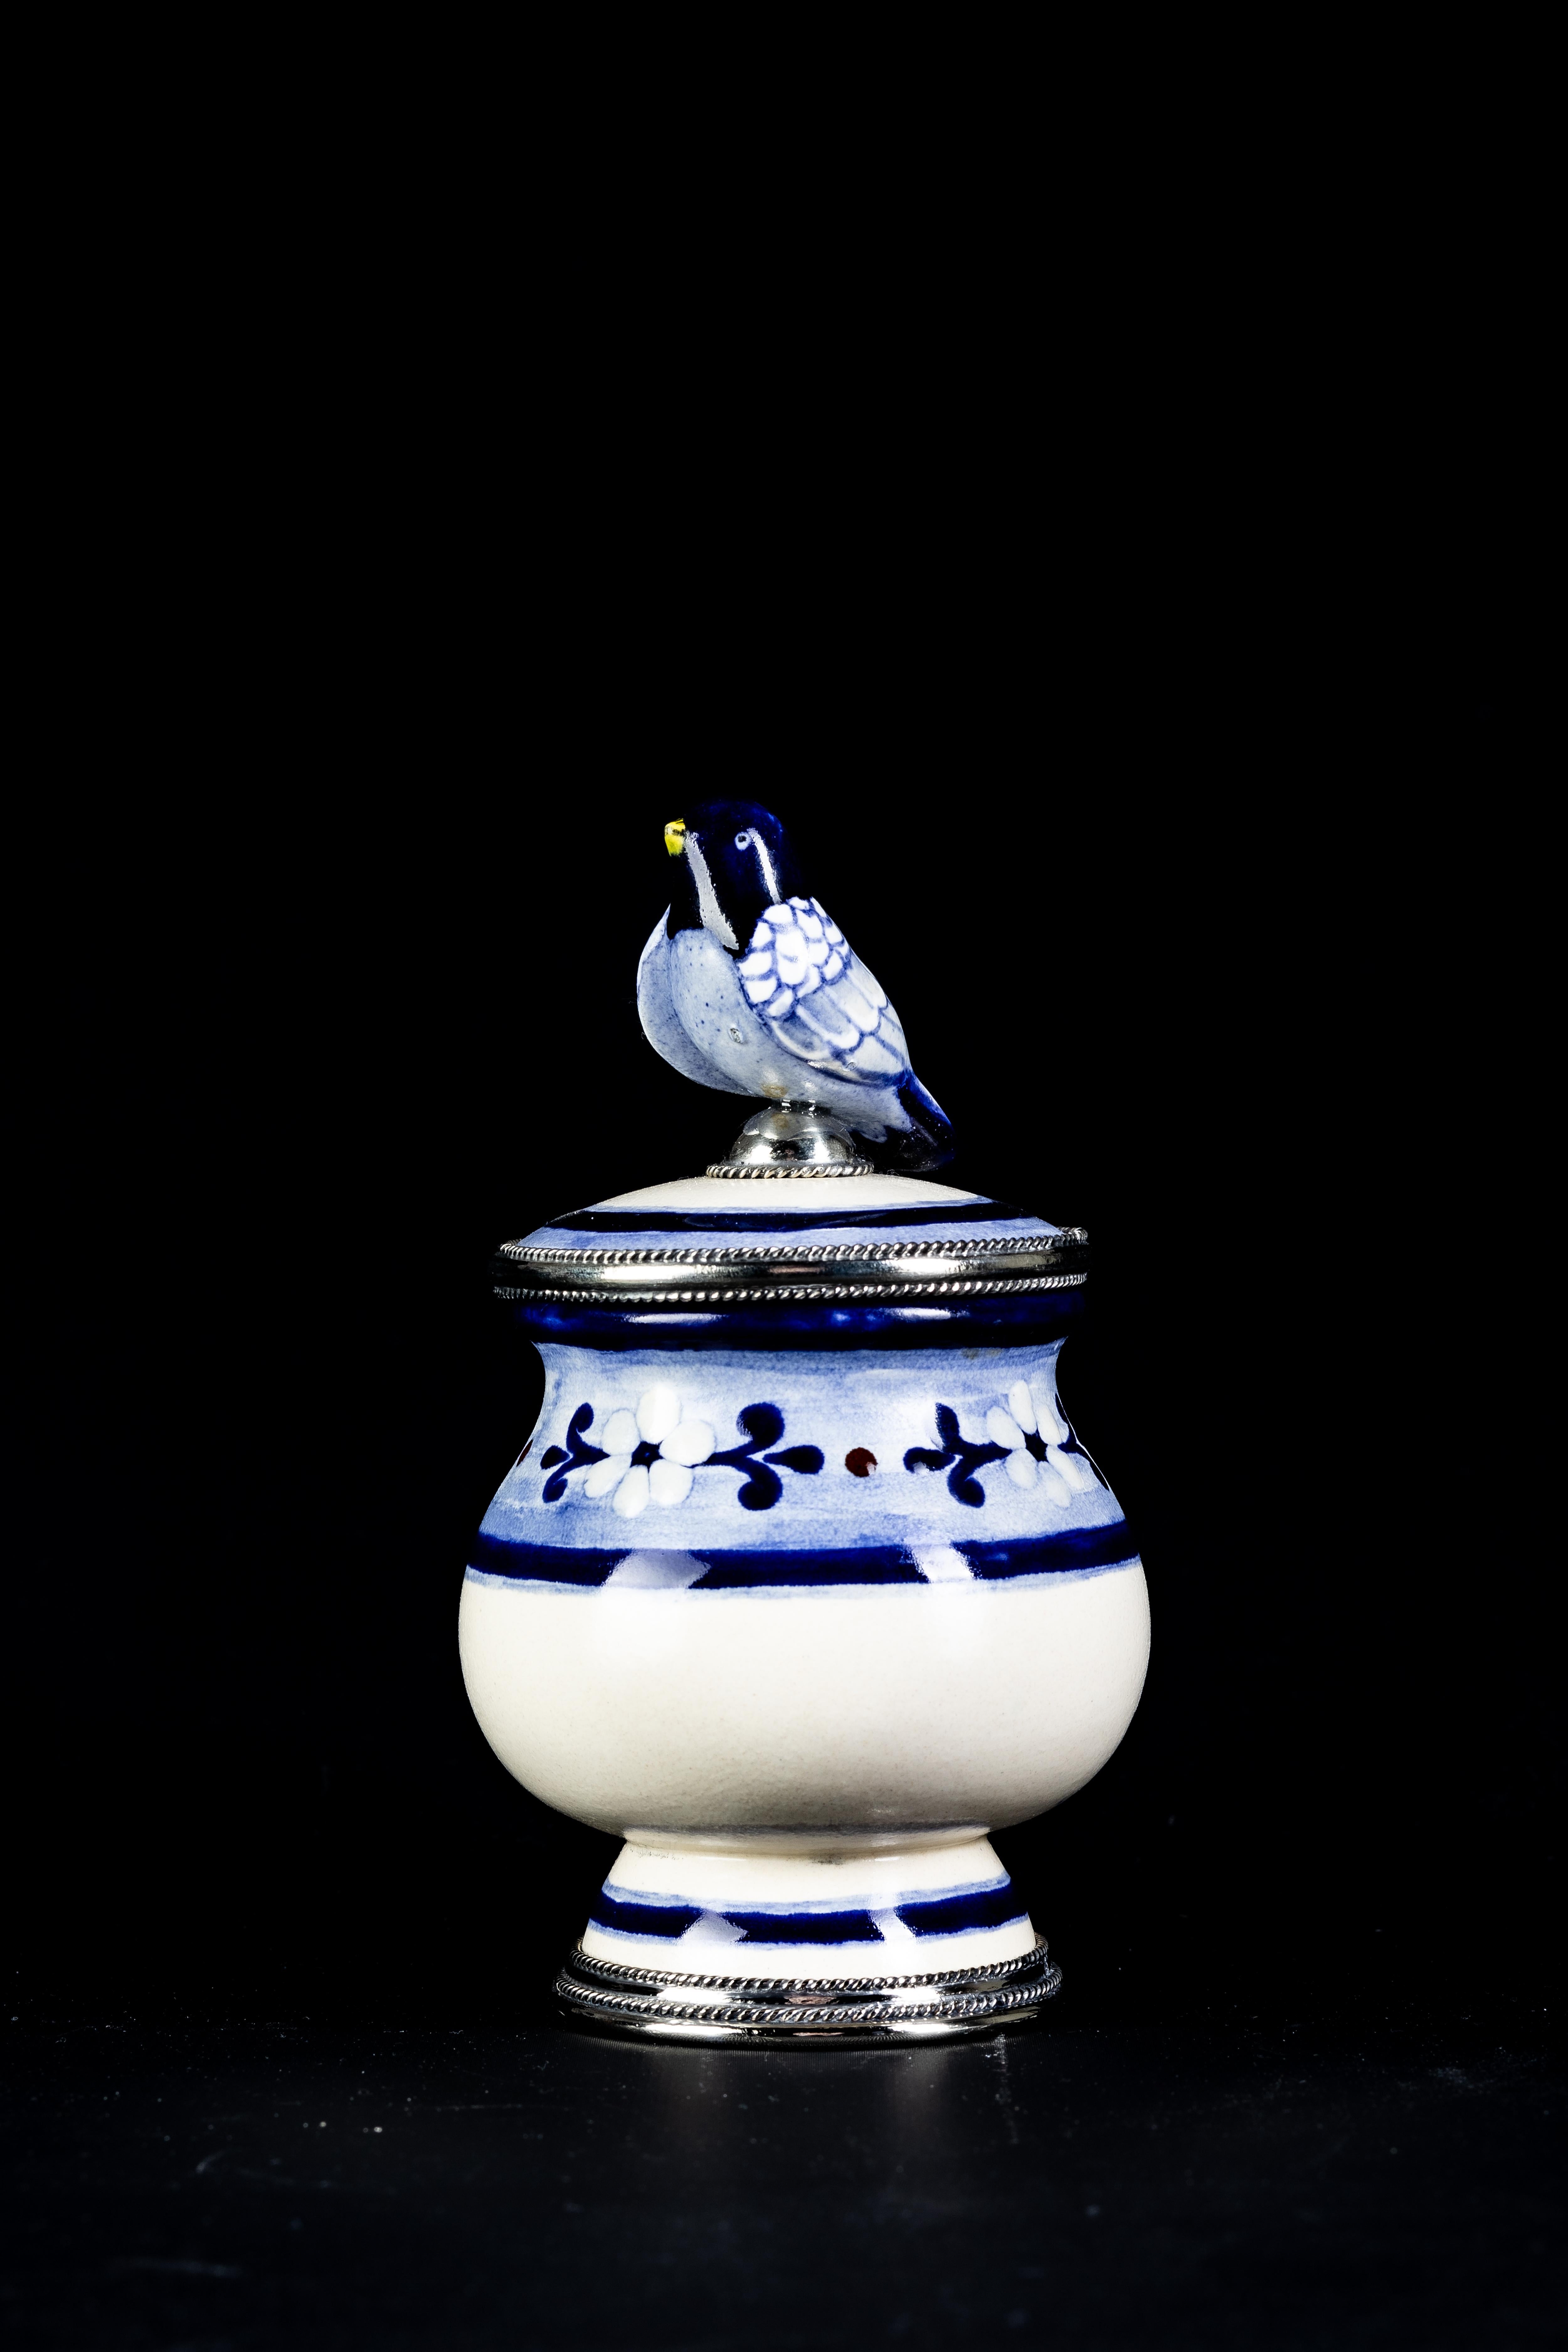 Other Ceramic and White Metal 'Alpaca' Compote Bird Centrepiece